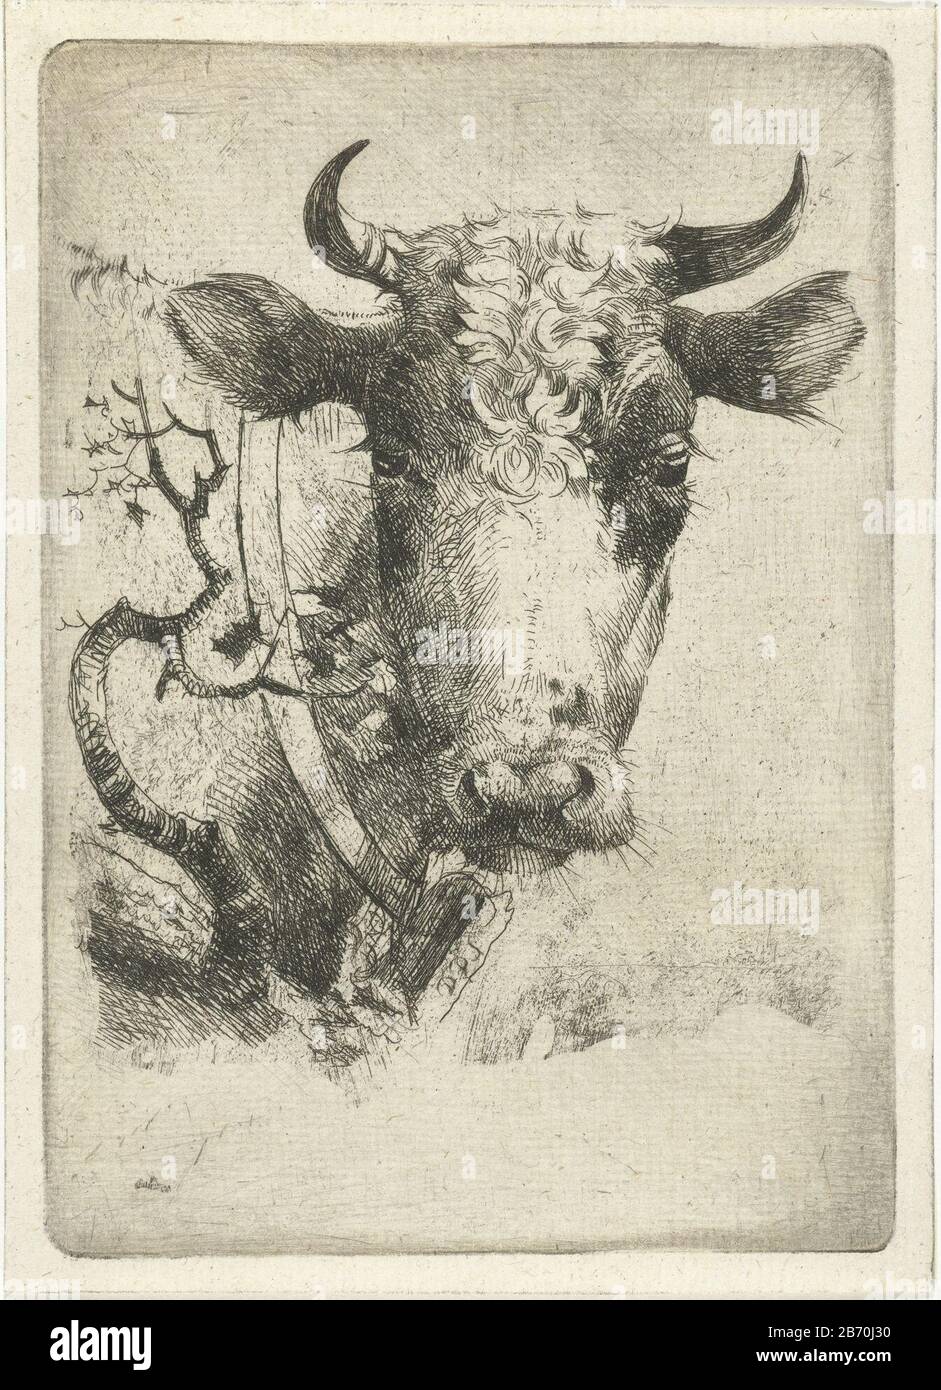 Kop van koe met halsband Head of cow with necklace object type: picture Item number: RP-P-1882-A 5955 Inscriptions / Brands: collector's mark, verso, stamped: Lugt 2228 Manufacturer : printmaker Dirk Dirksen Place manufacture: Rotterdam Date: 1821 - 1885 Physical features: etching material: paper Technique: etching dimensions: plate edge: h 129 mm × W 91 mm Subject: cow Stock Photo